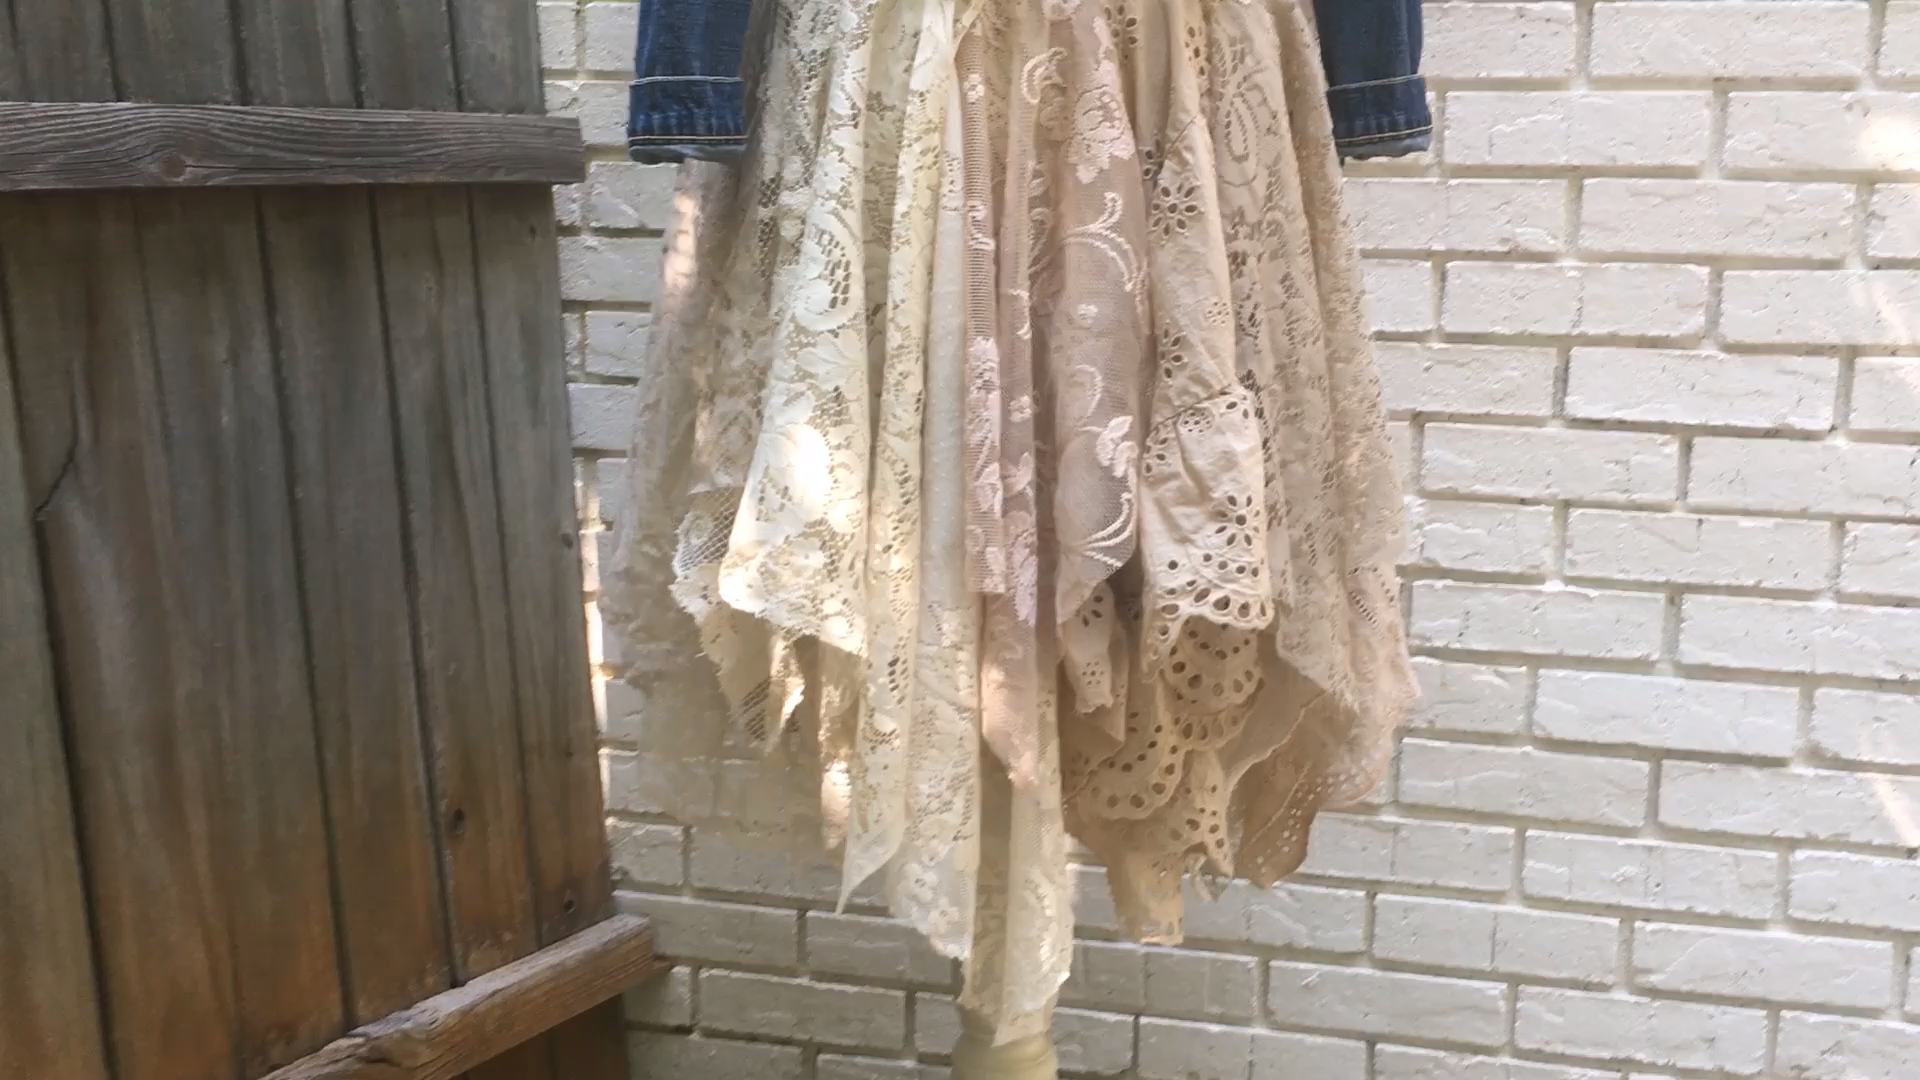 Layered Lace Skirt DIY -   17 DIY Clothes Sweater link ideas